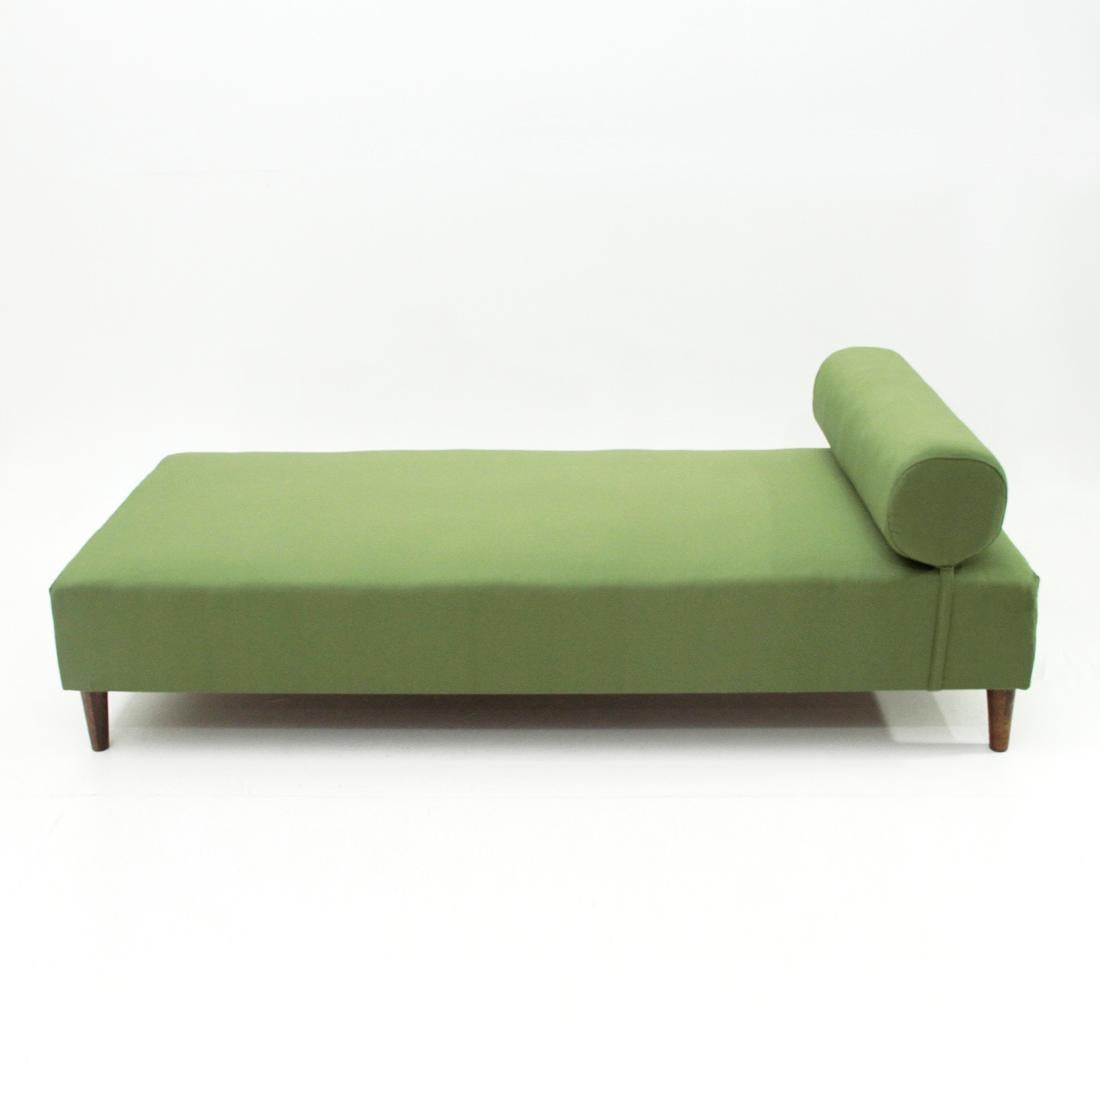 Day bed of Italian manufacture produced in the 1950s. 
Wooden structure padded and lined with new green fabric.
Cylindrical cushion.
Legs in tapered wood. 
Good general conditions, some signs due to normal use over time.

Dimensions: Width 192